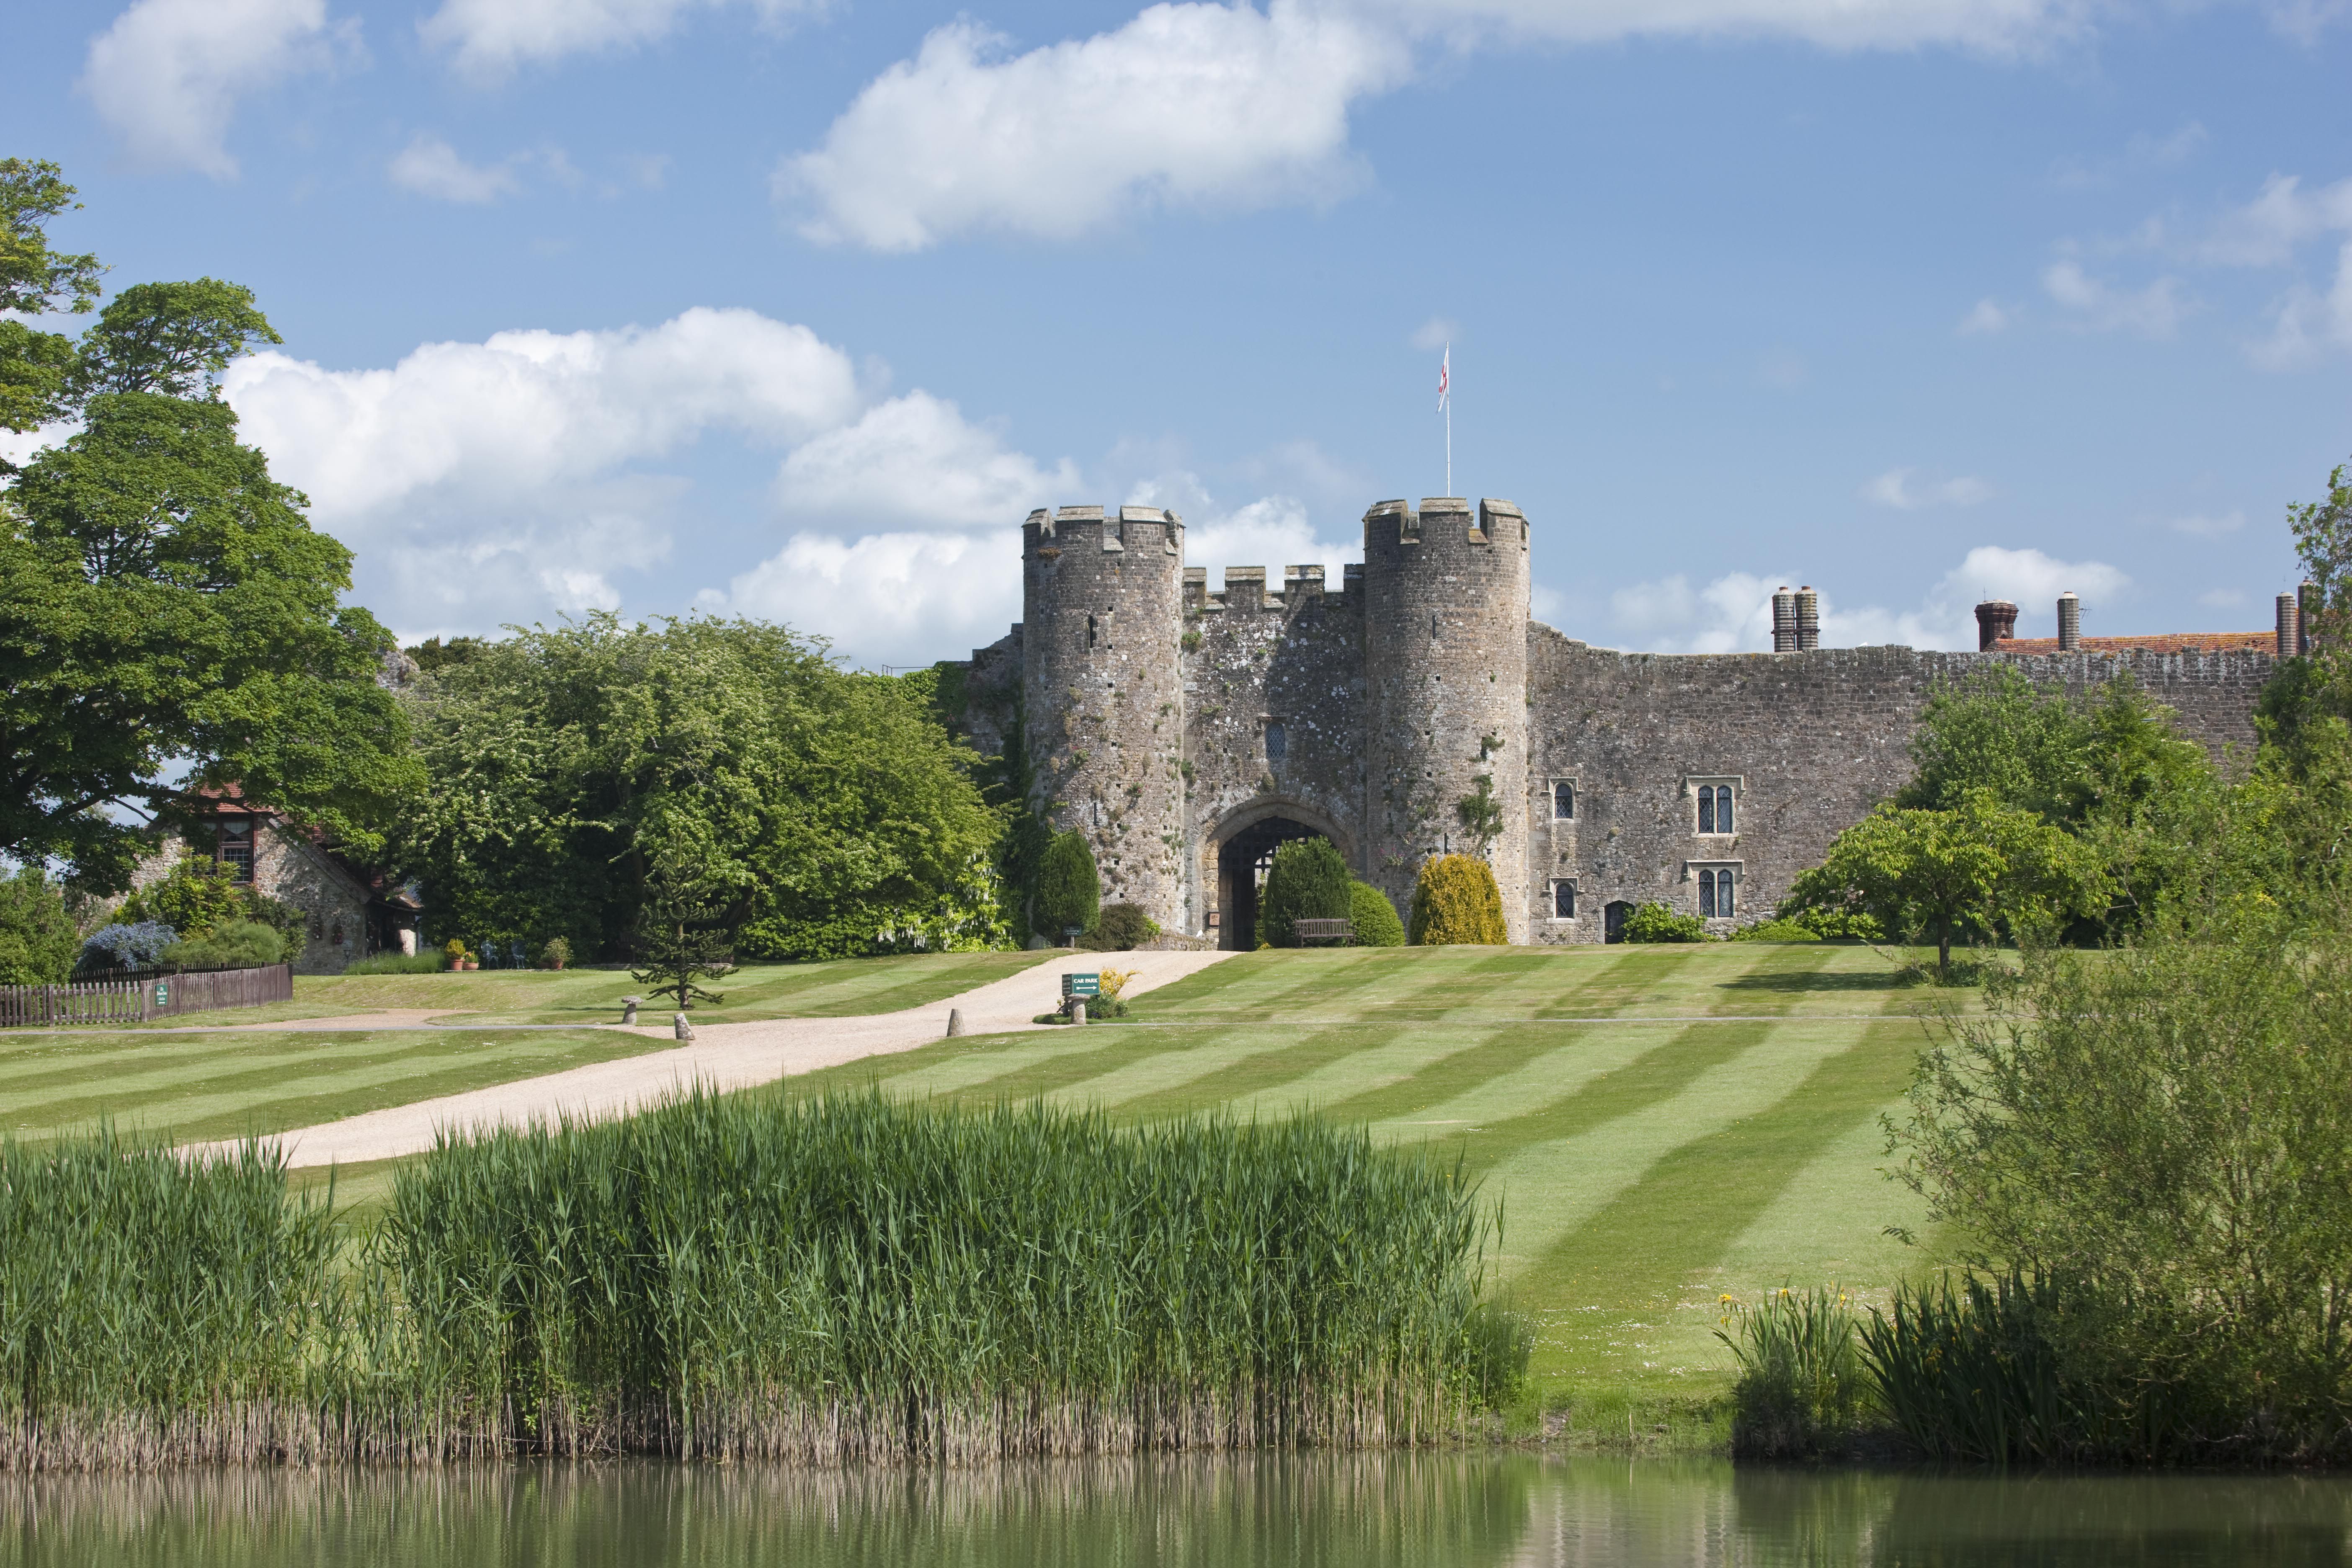 Stay in a Castle - The United Kingdom's Castle Hotels